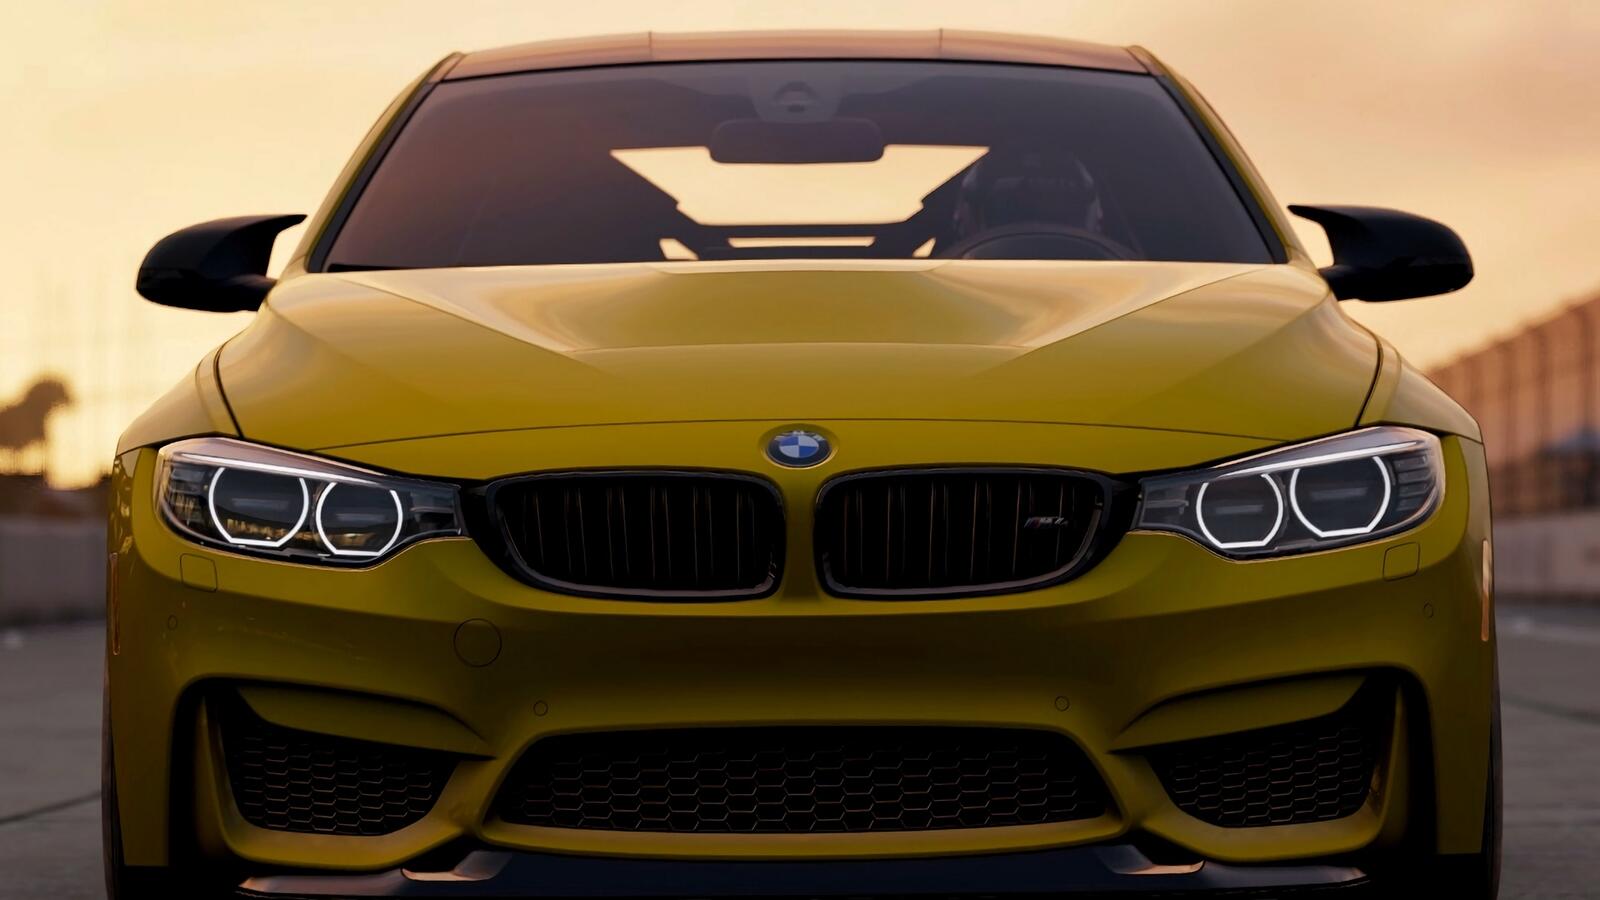 Wallpapers bmw m4 yellow front on the desktop